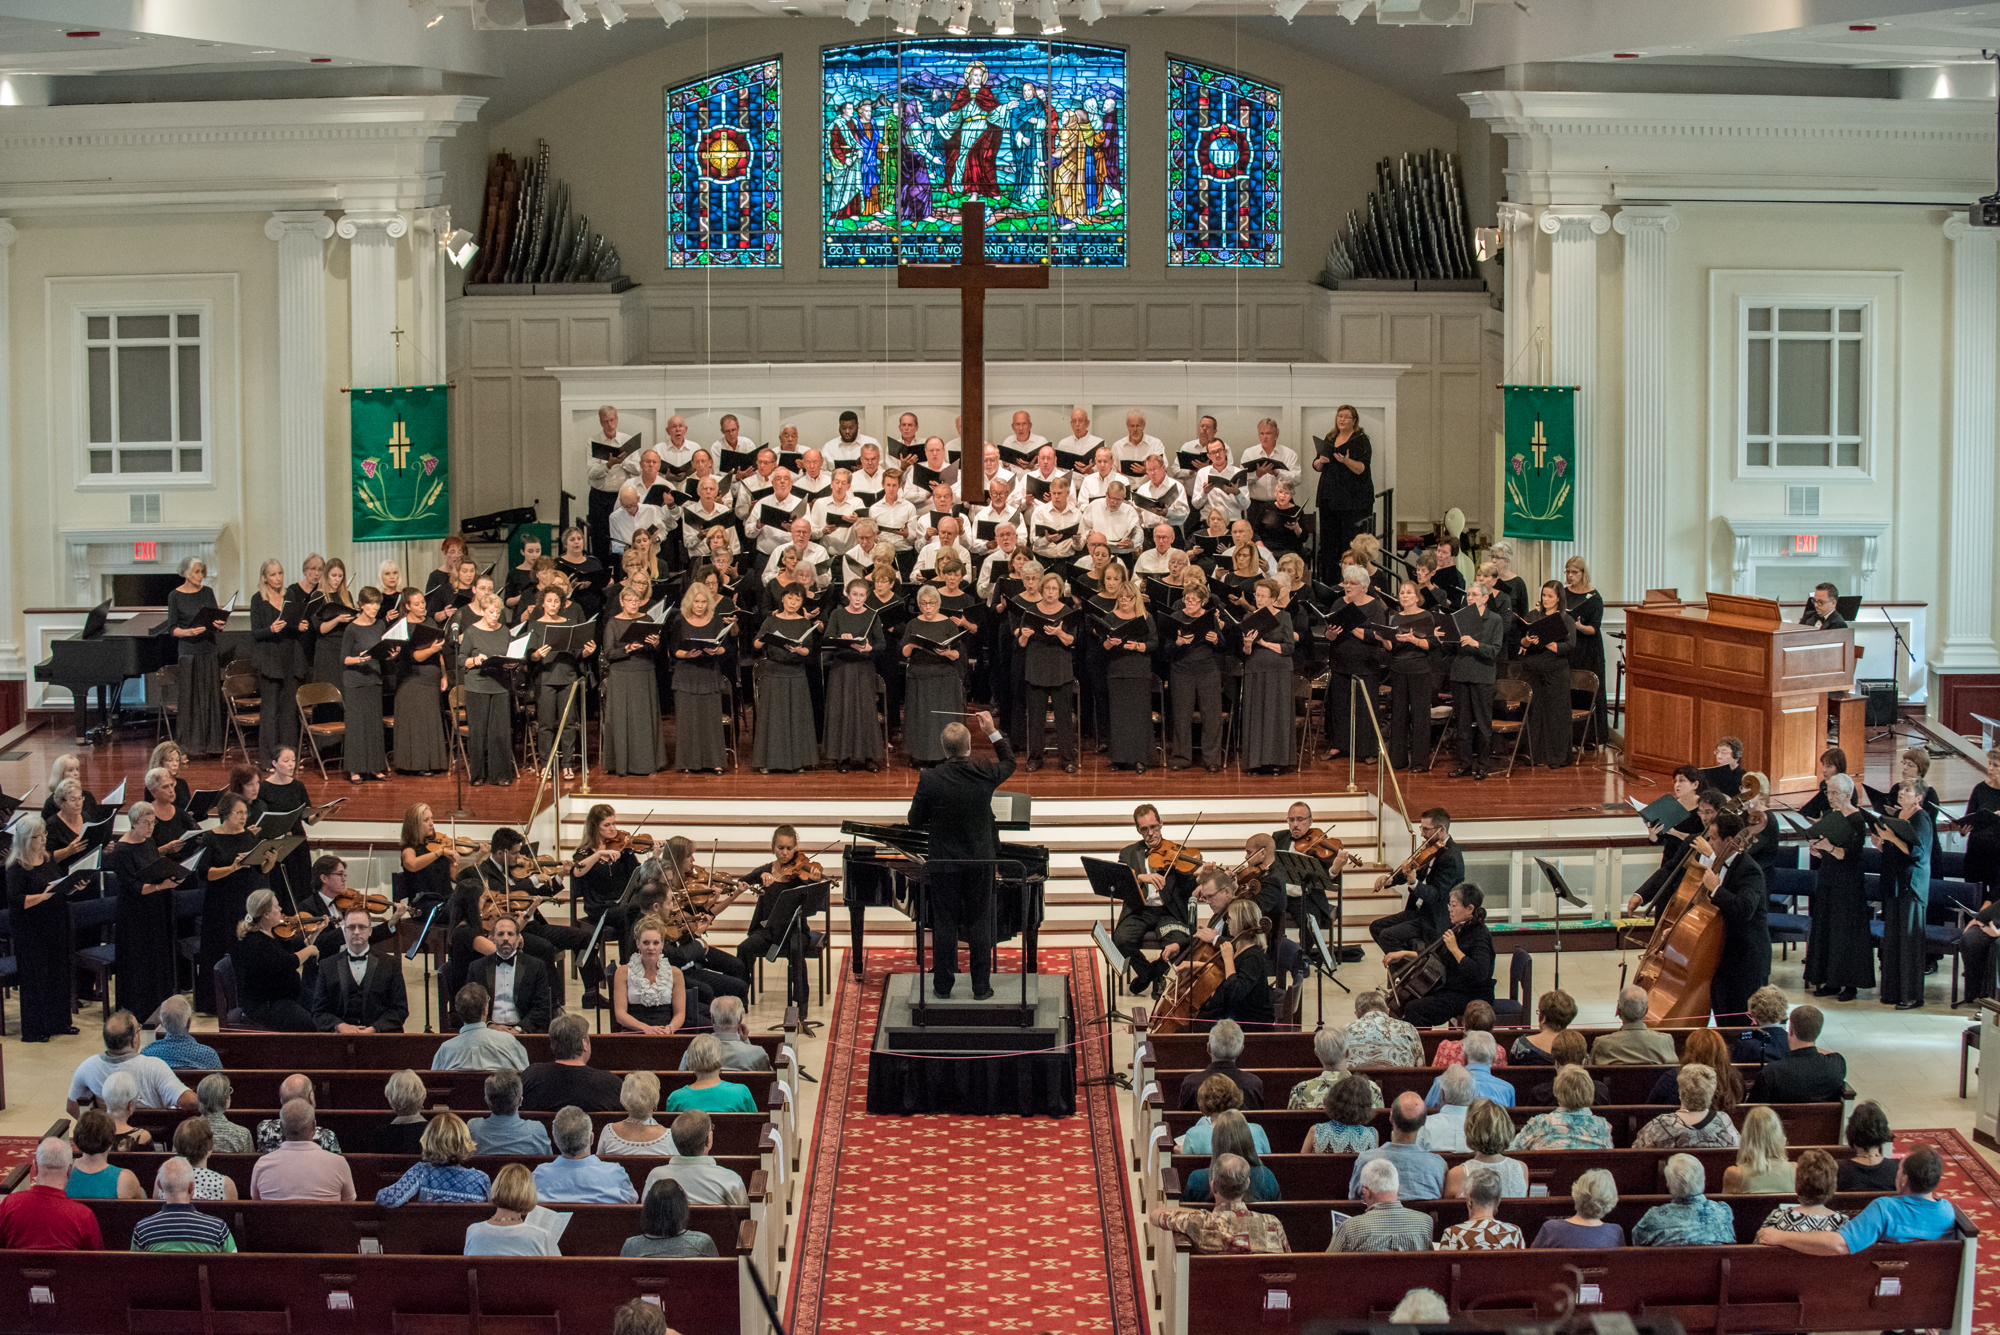 Key Chorale’s 110 voices will be joined by Steinway artist Jeffrey Biegel, considered one of the most prolific artists of his generation, along with six professional soloists and a 29-piece orchestra. Courtesy photo